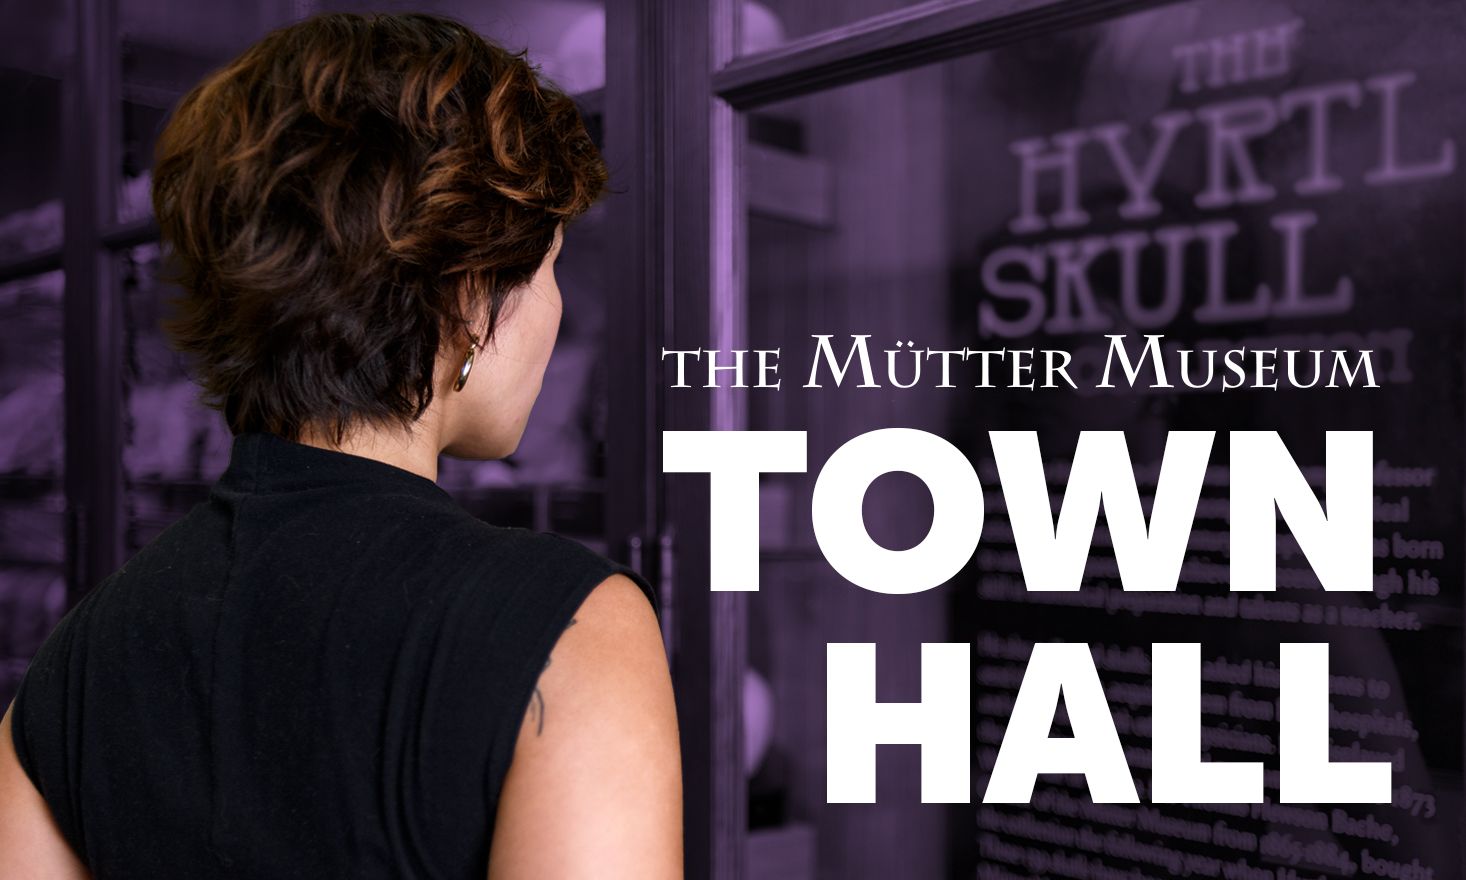 Purple background with text reading "The Mutter Museum Town Hall"